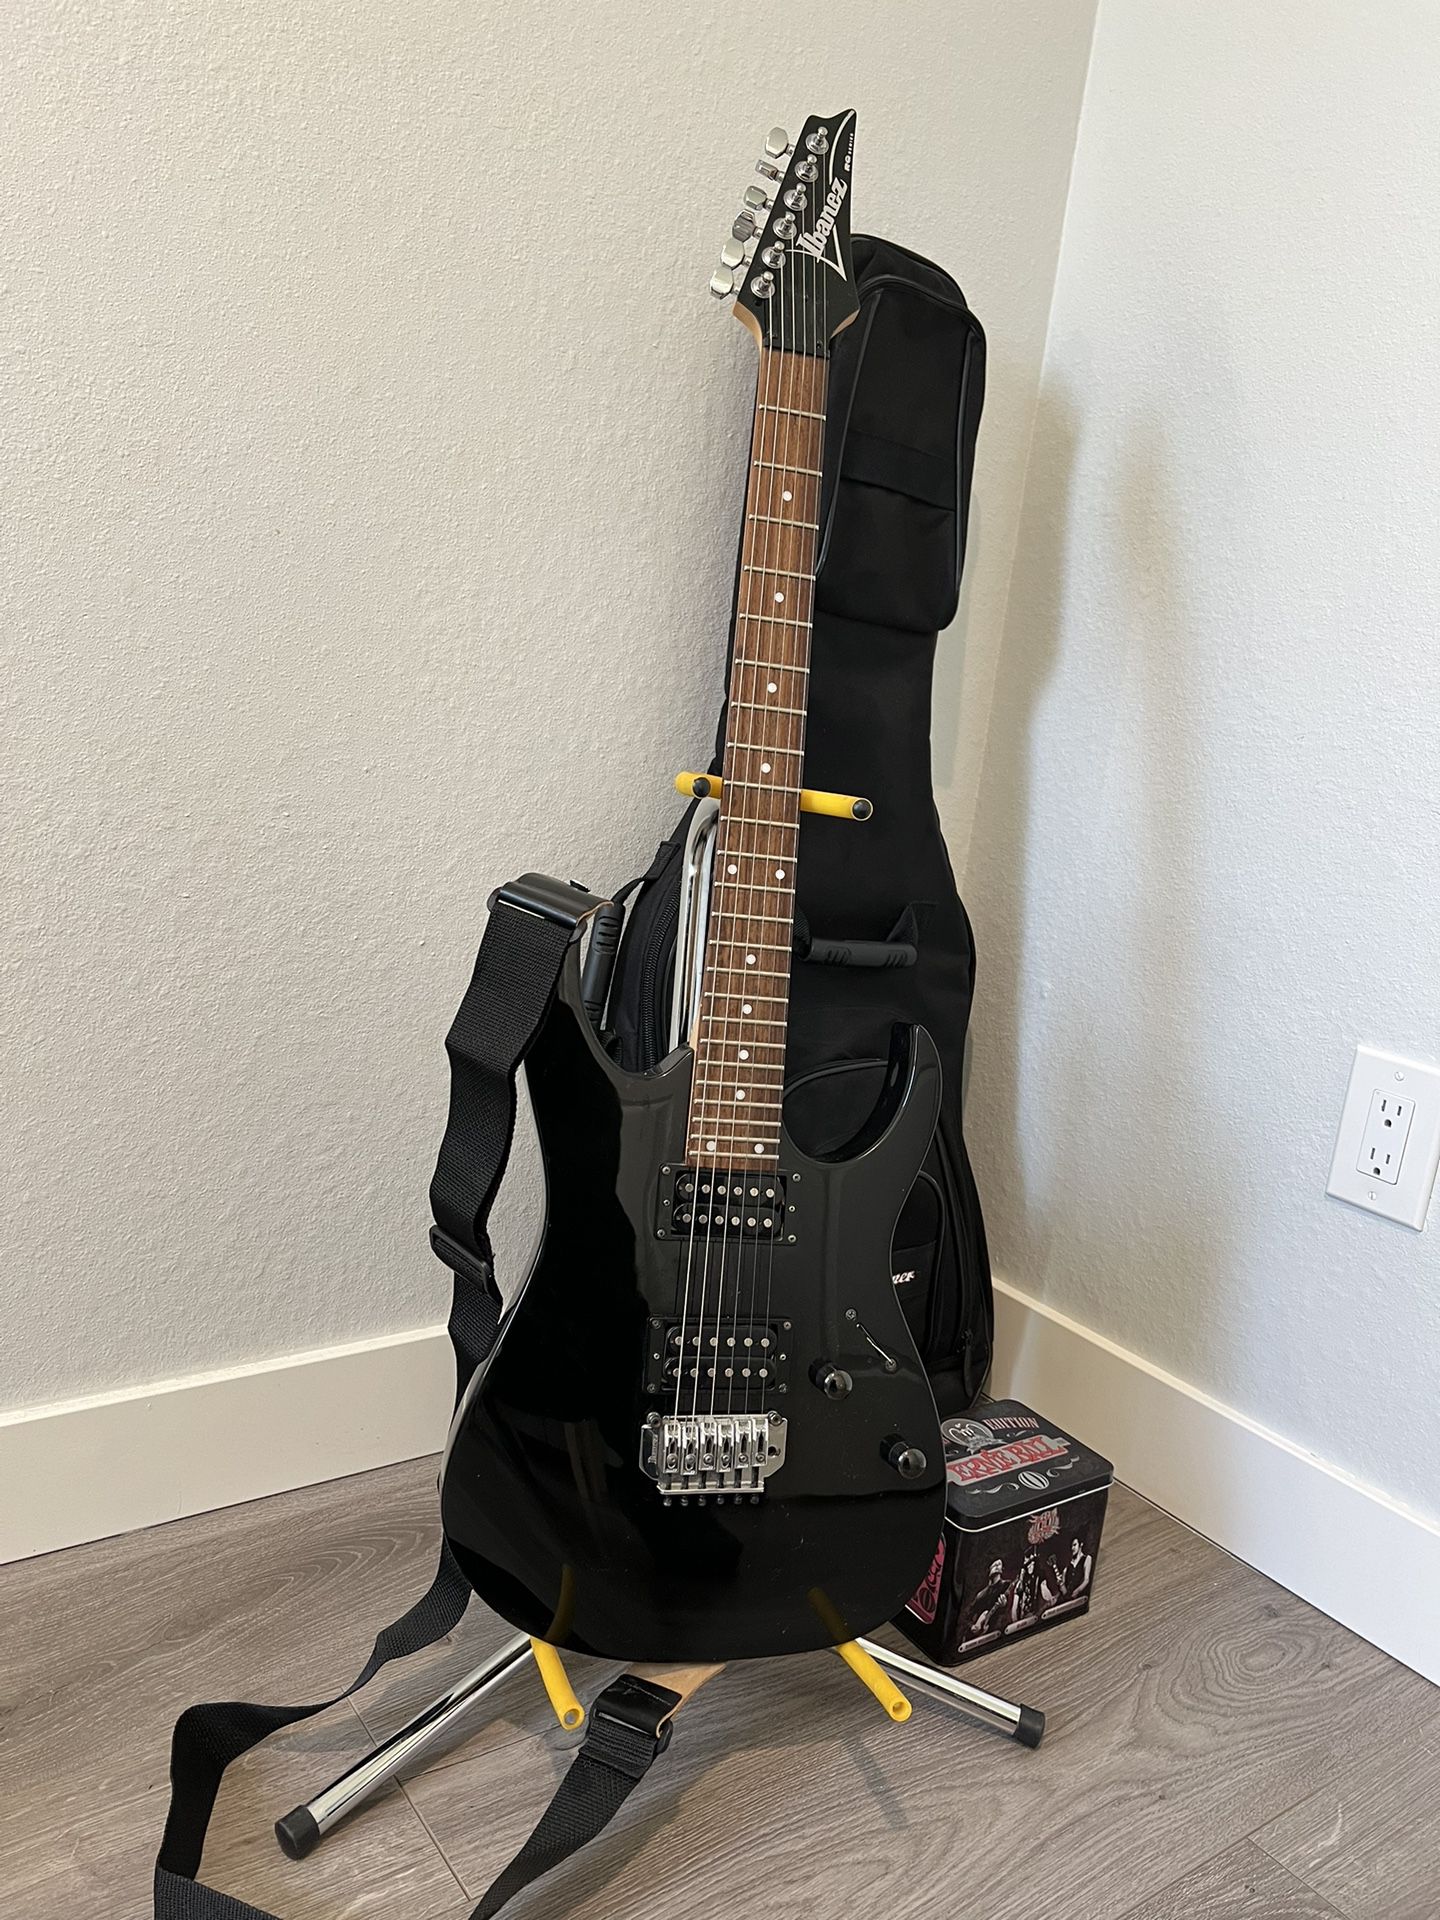 Ibanez Electric Guitar With Case And Accessories 